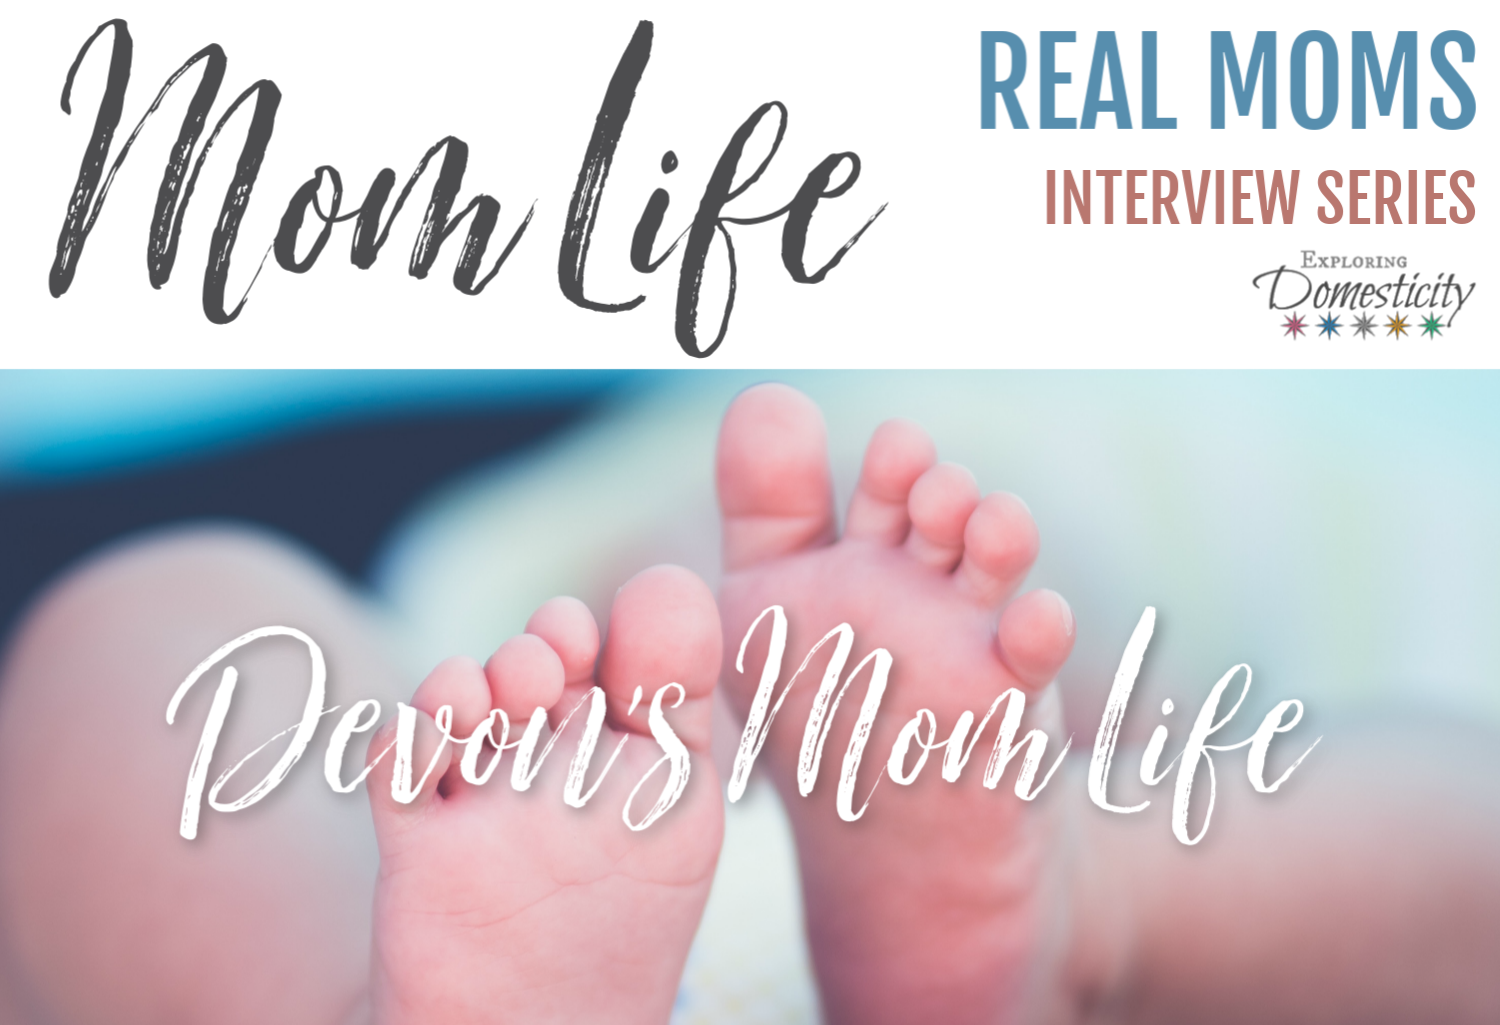 Devon's Mom Life - Real Moms Interview Series feature